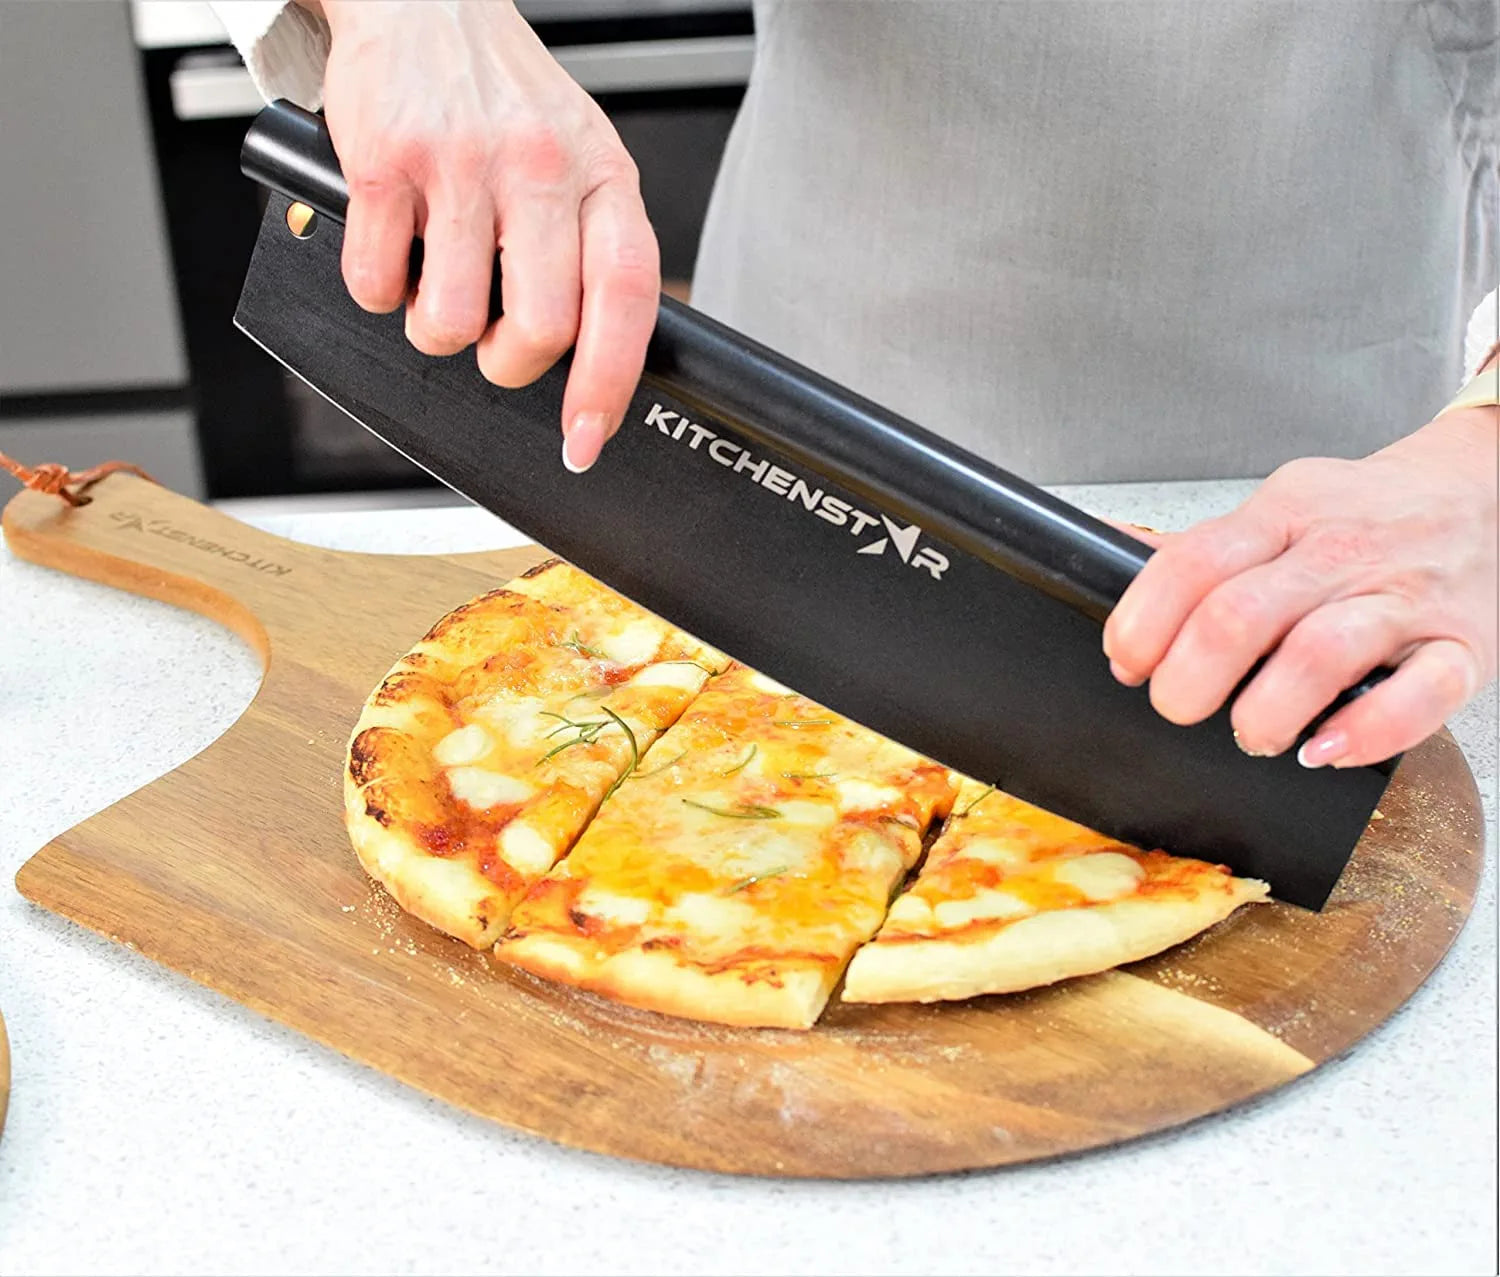 KitchenStar Pizza Cutter Rocker 12 inch, 2 pcs. - Silver & Black - Super Sharp Stainless Steel Slicer Knife with Hanging Hole & Protective Blade Cover - Fast and Easy Slicing, Dishwasher Safe